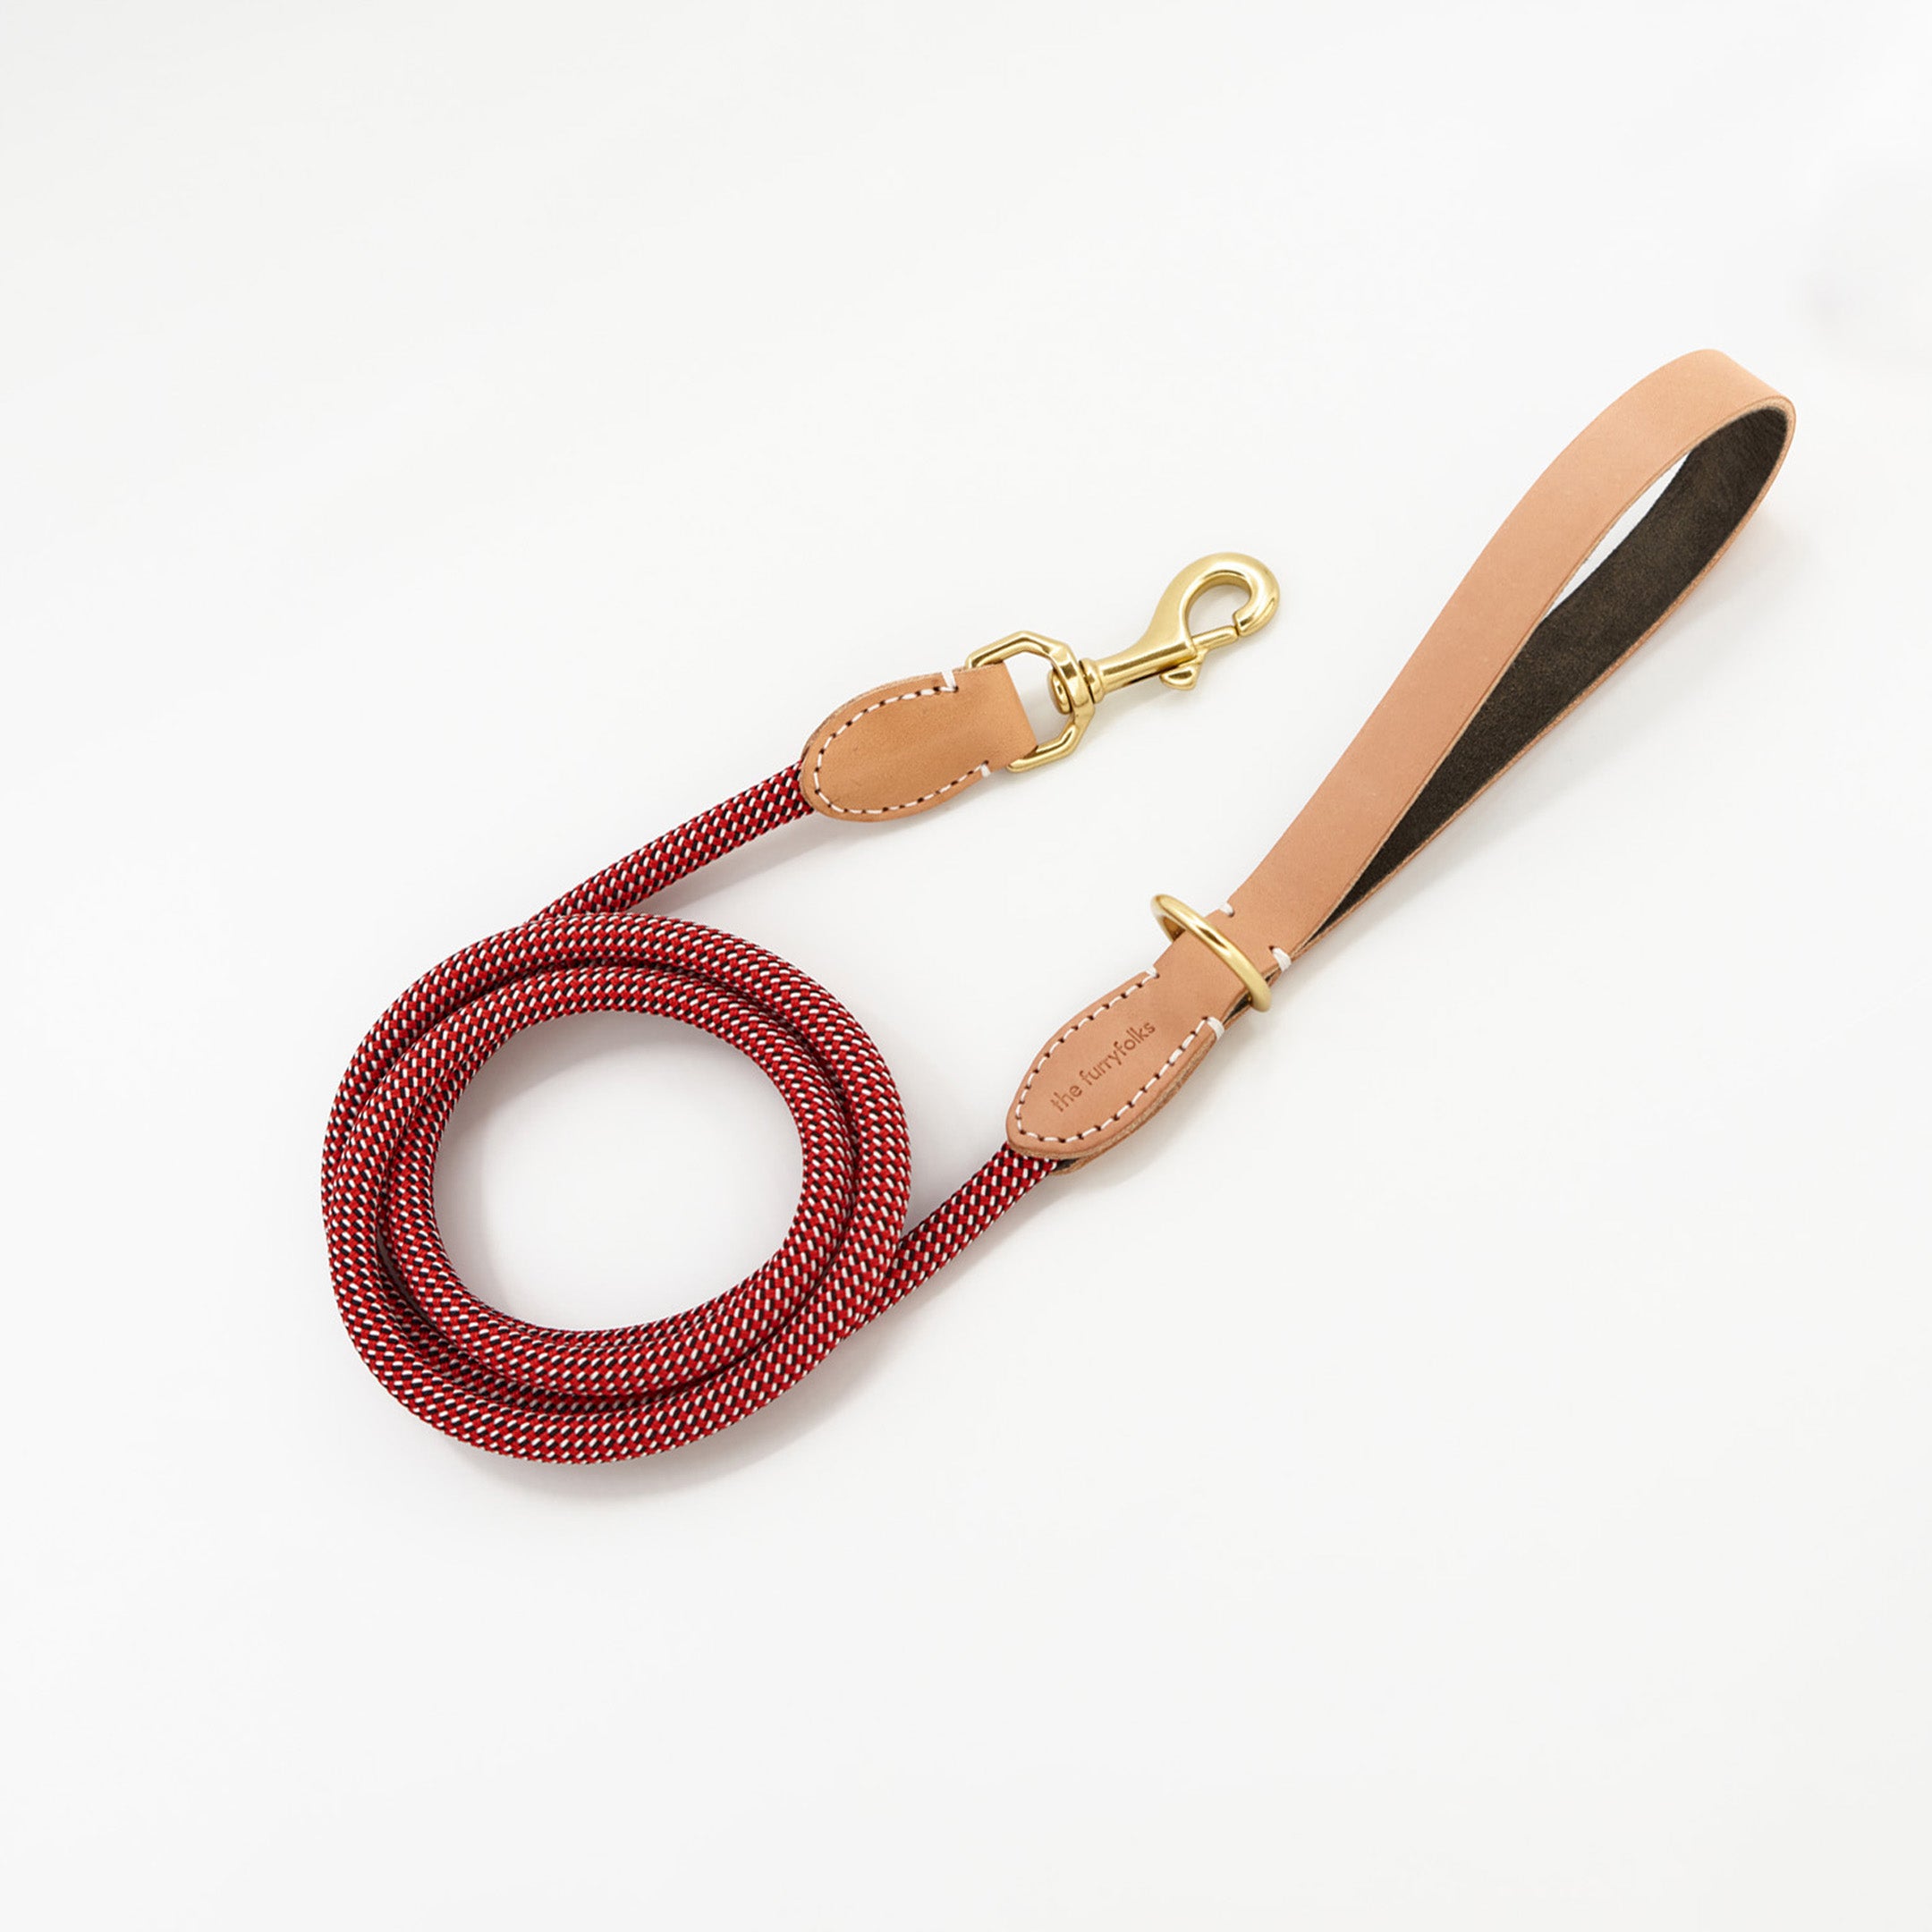 The image presents a red and white woven dog leash with tan leather accents and gold-tone hardware. A leather patch near the handle is embossed with "The Furryfolks," suggesting it is part of a pet accessory collection. The leash's design suggests durability and style, and the white background accentuates its bright colors and quality craftsmanship.